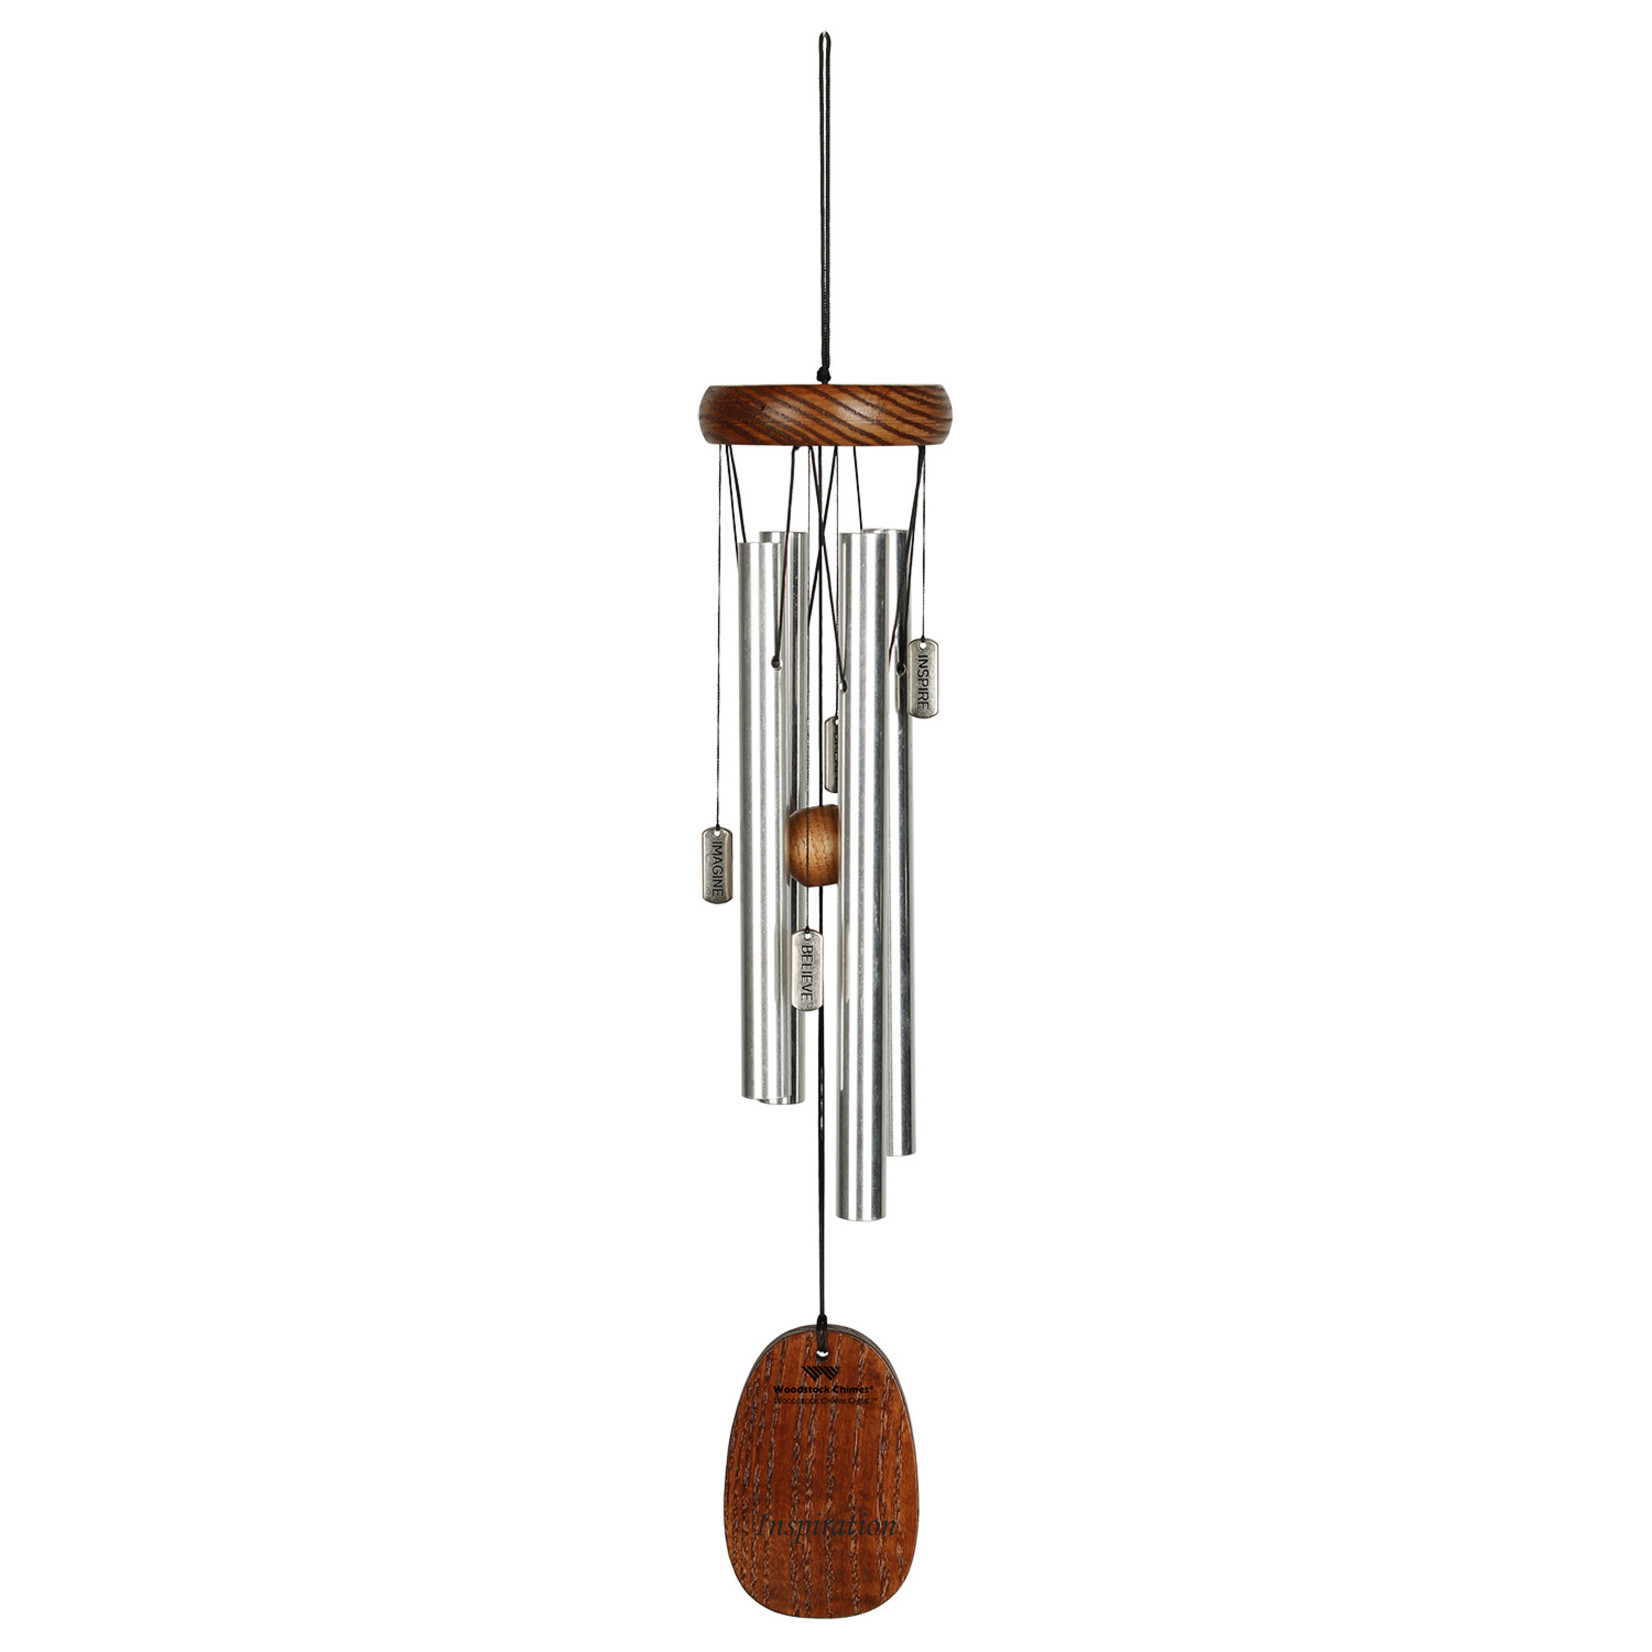 Woodstock Chimes Charm Chime - Inspiration